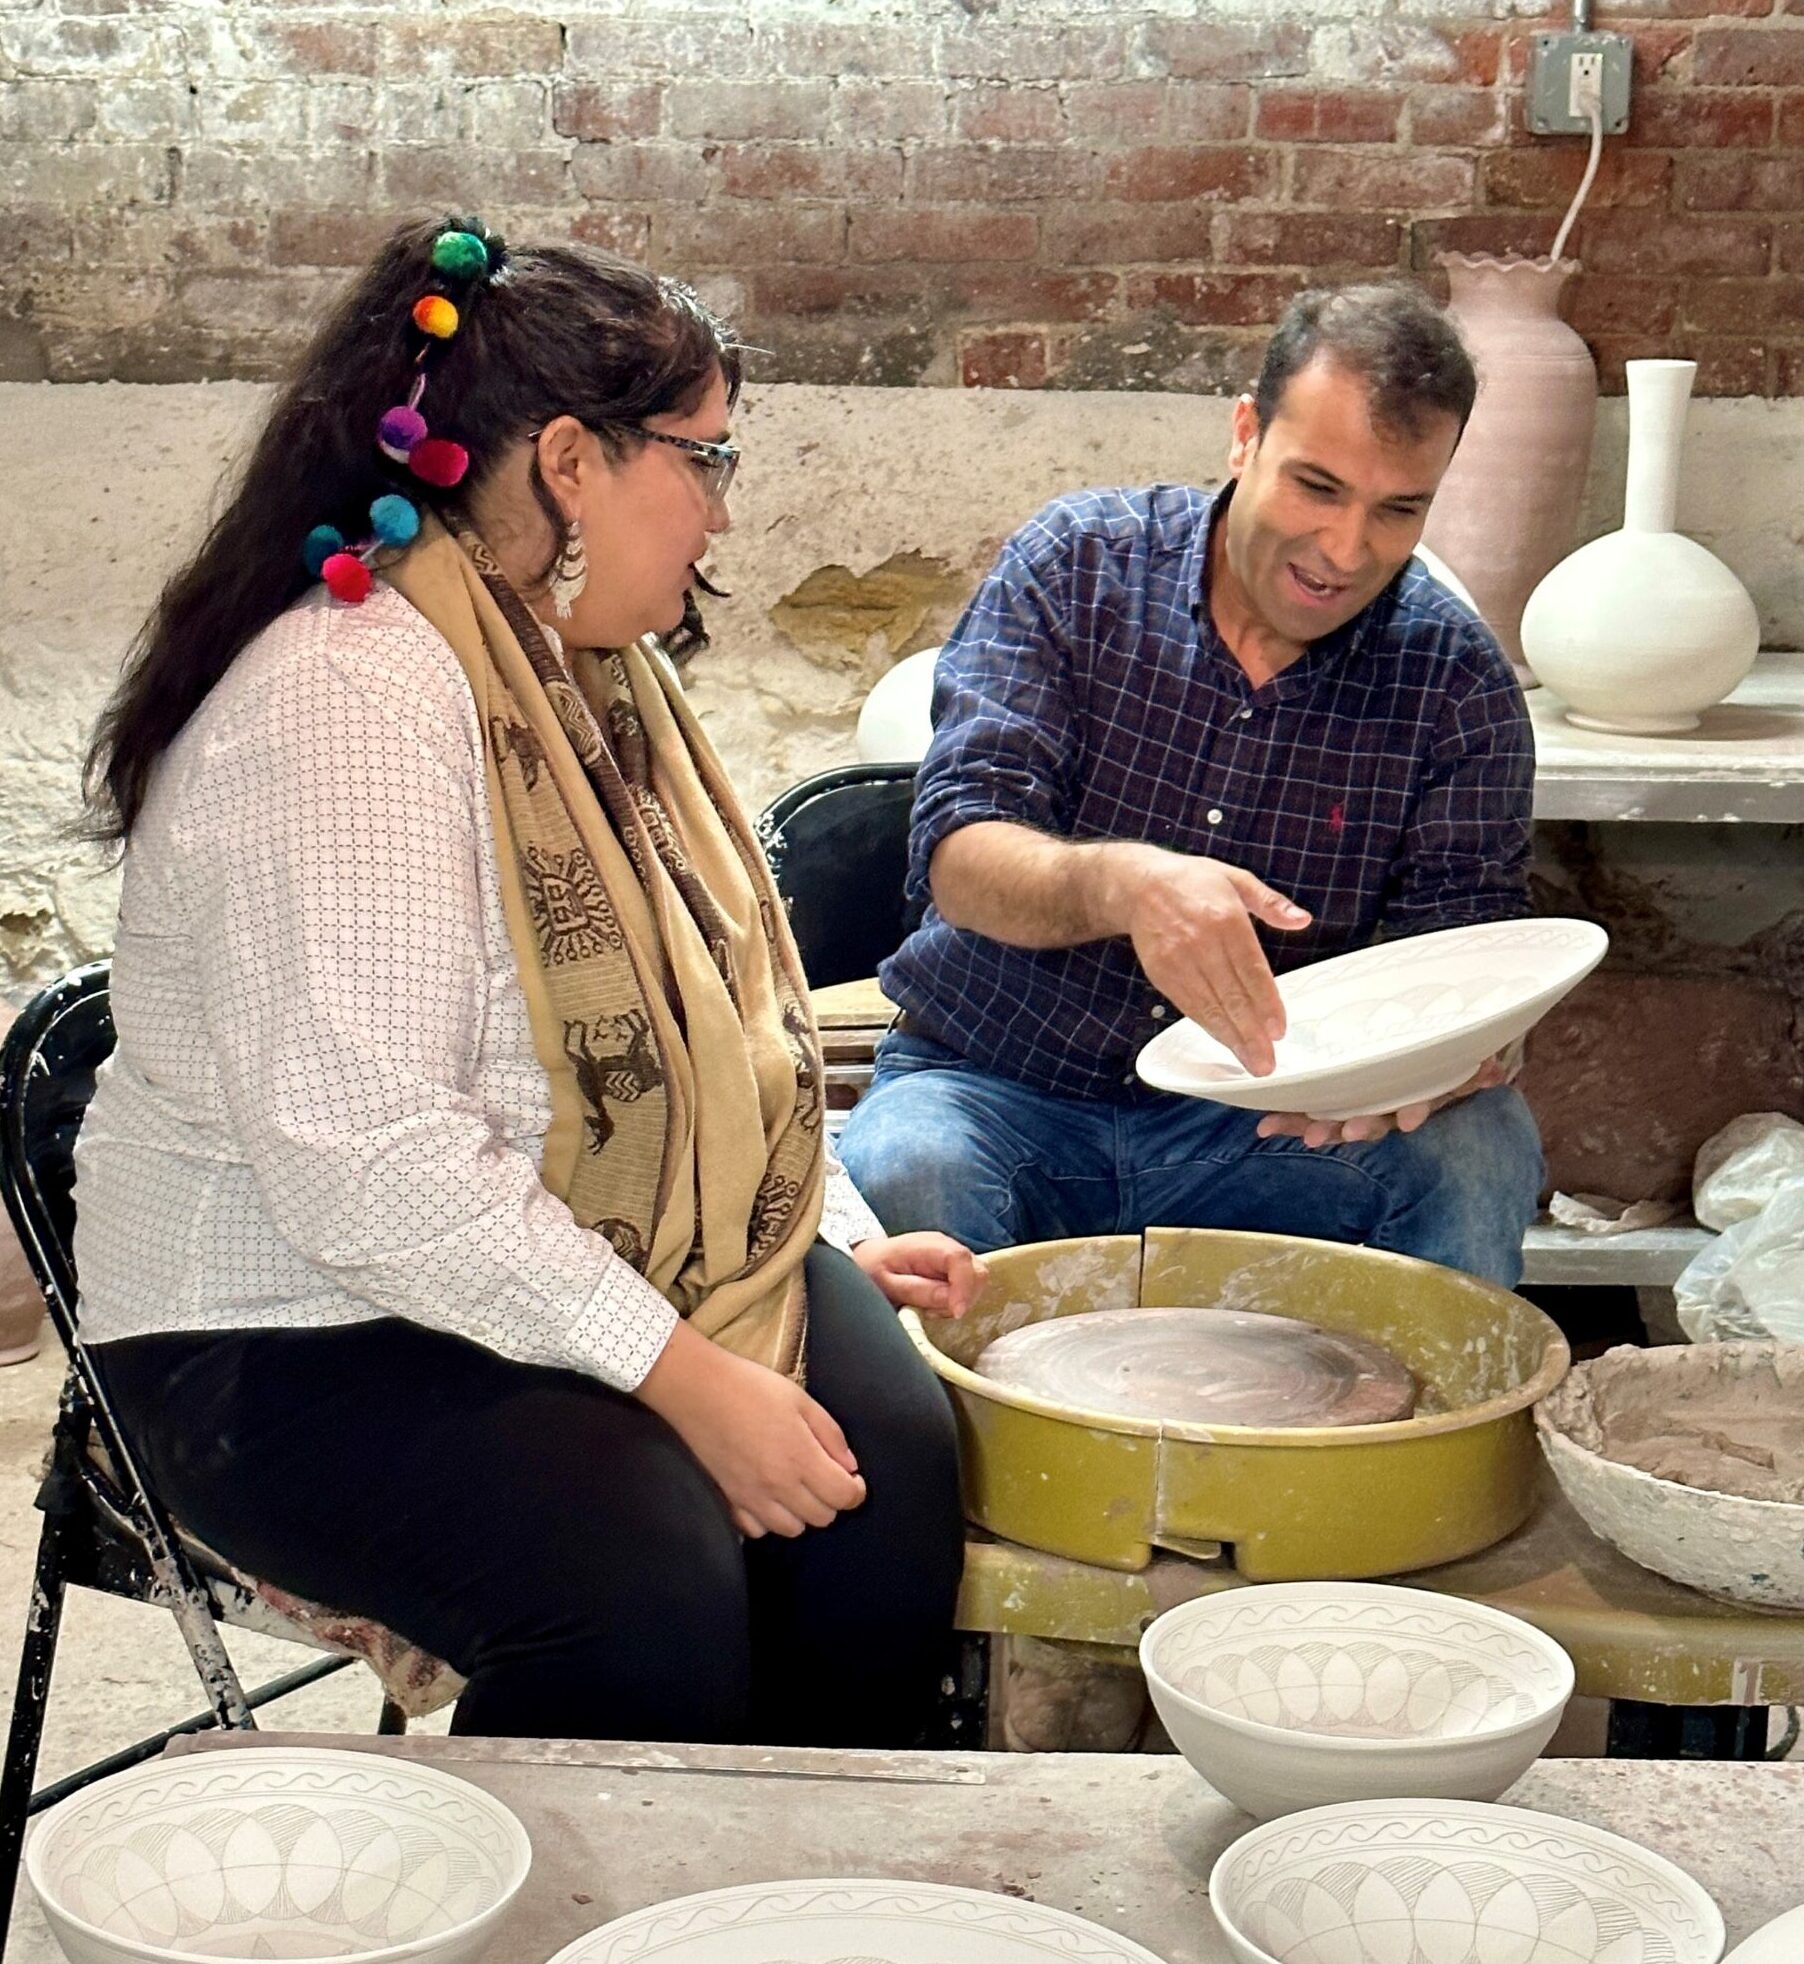 Man showing young woman how to make pottery